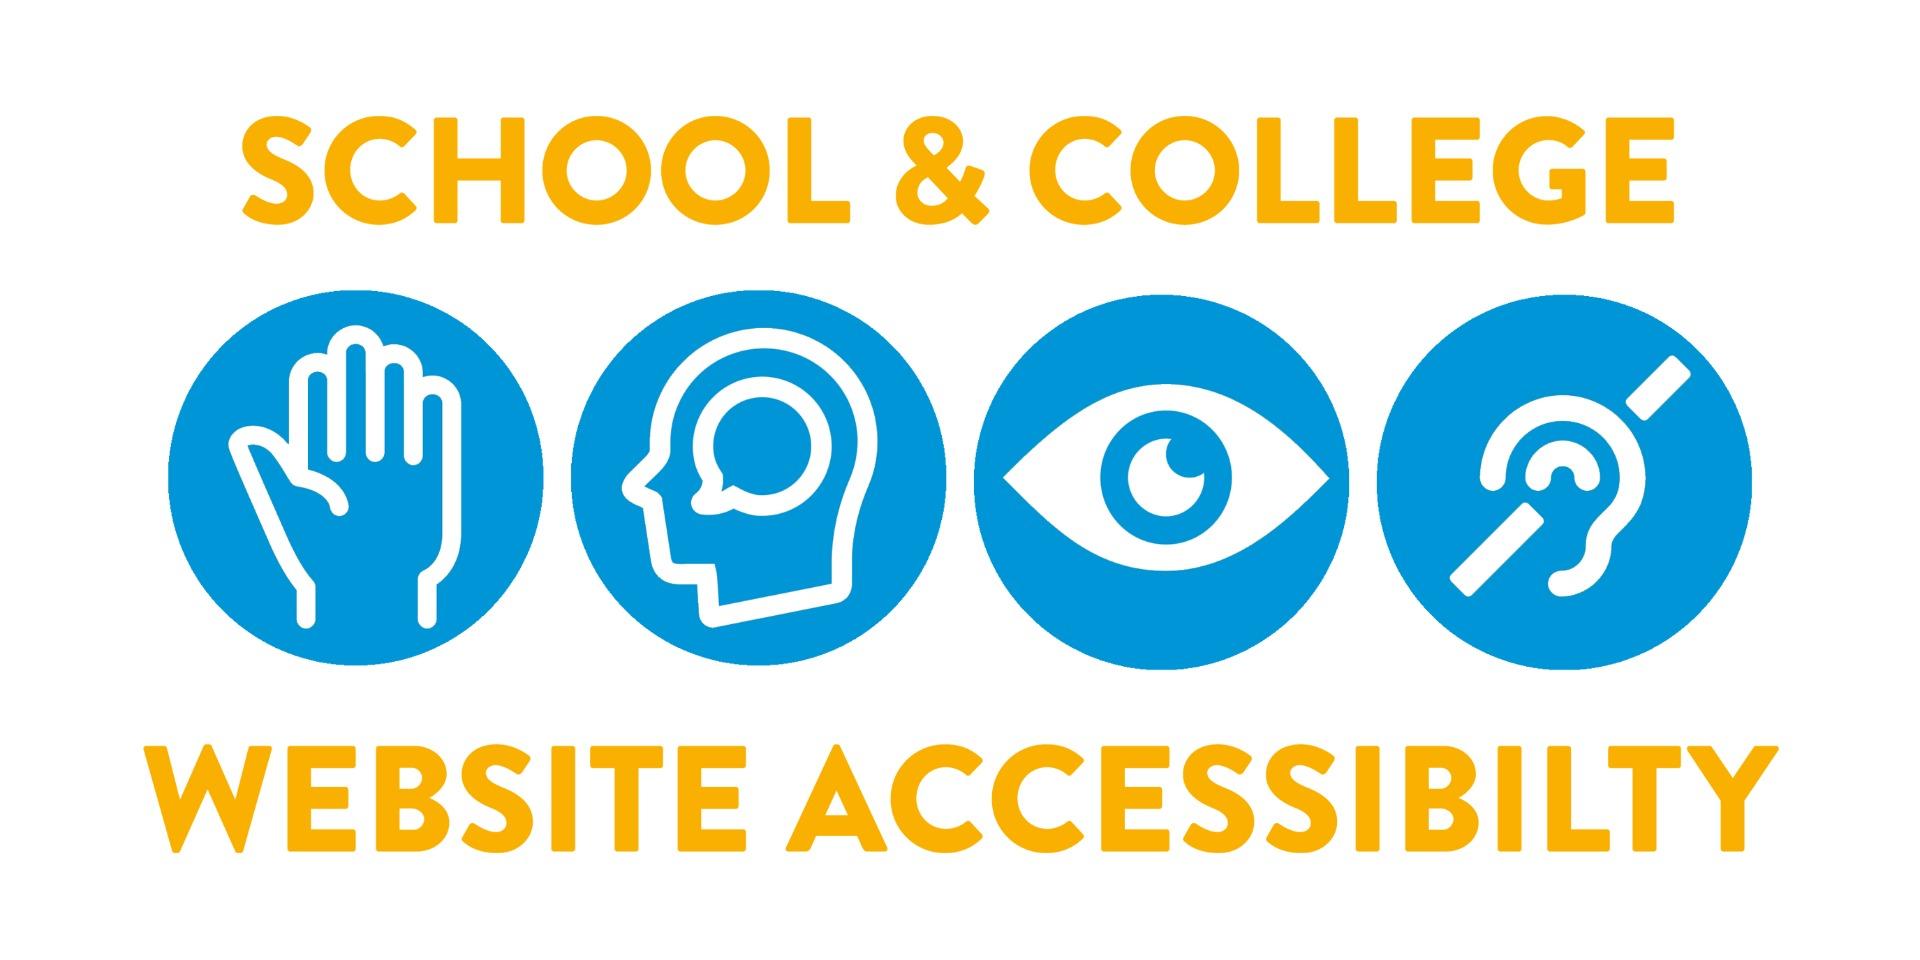 School & College Website Accessibility